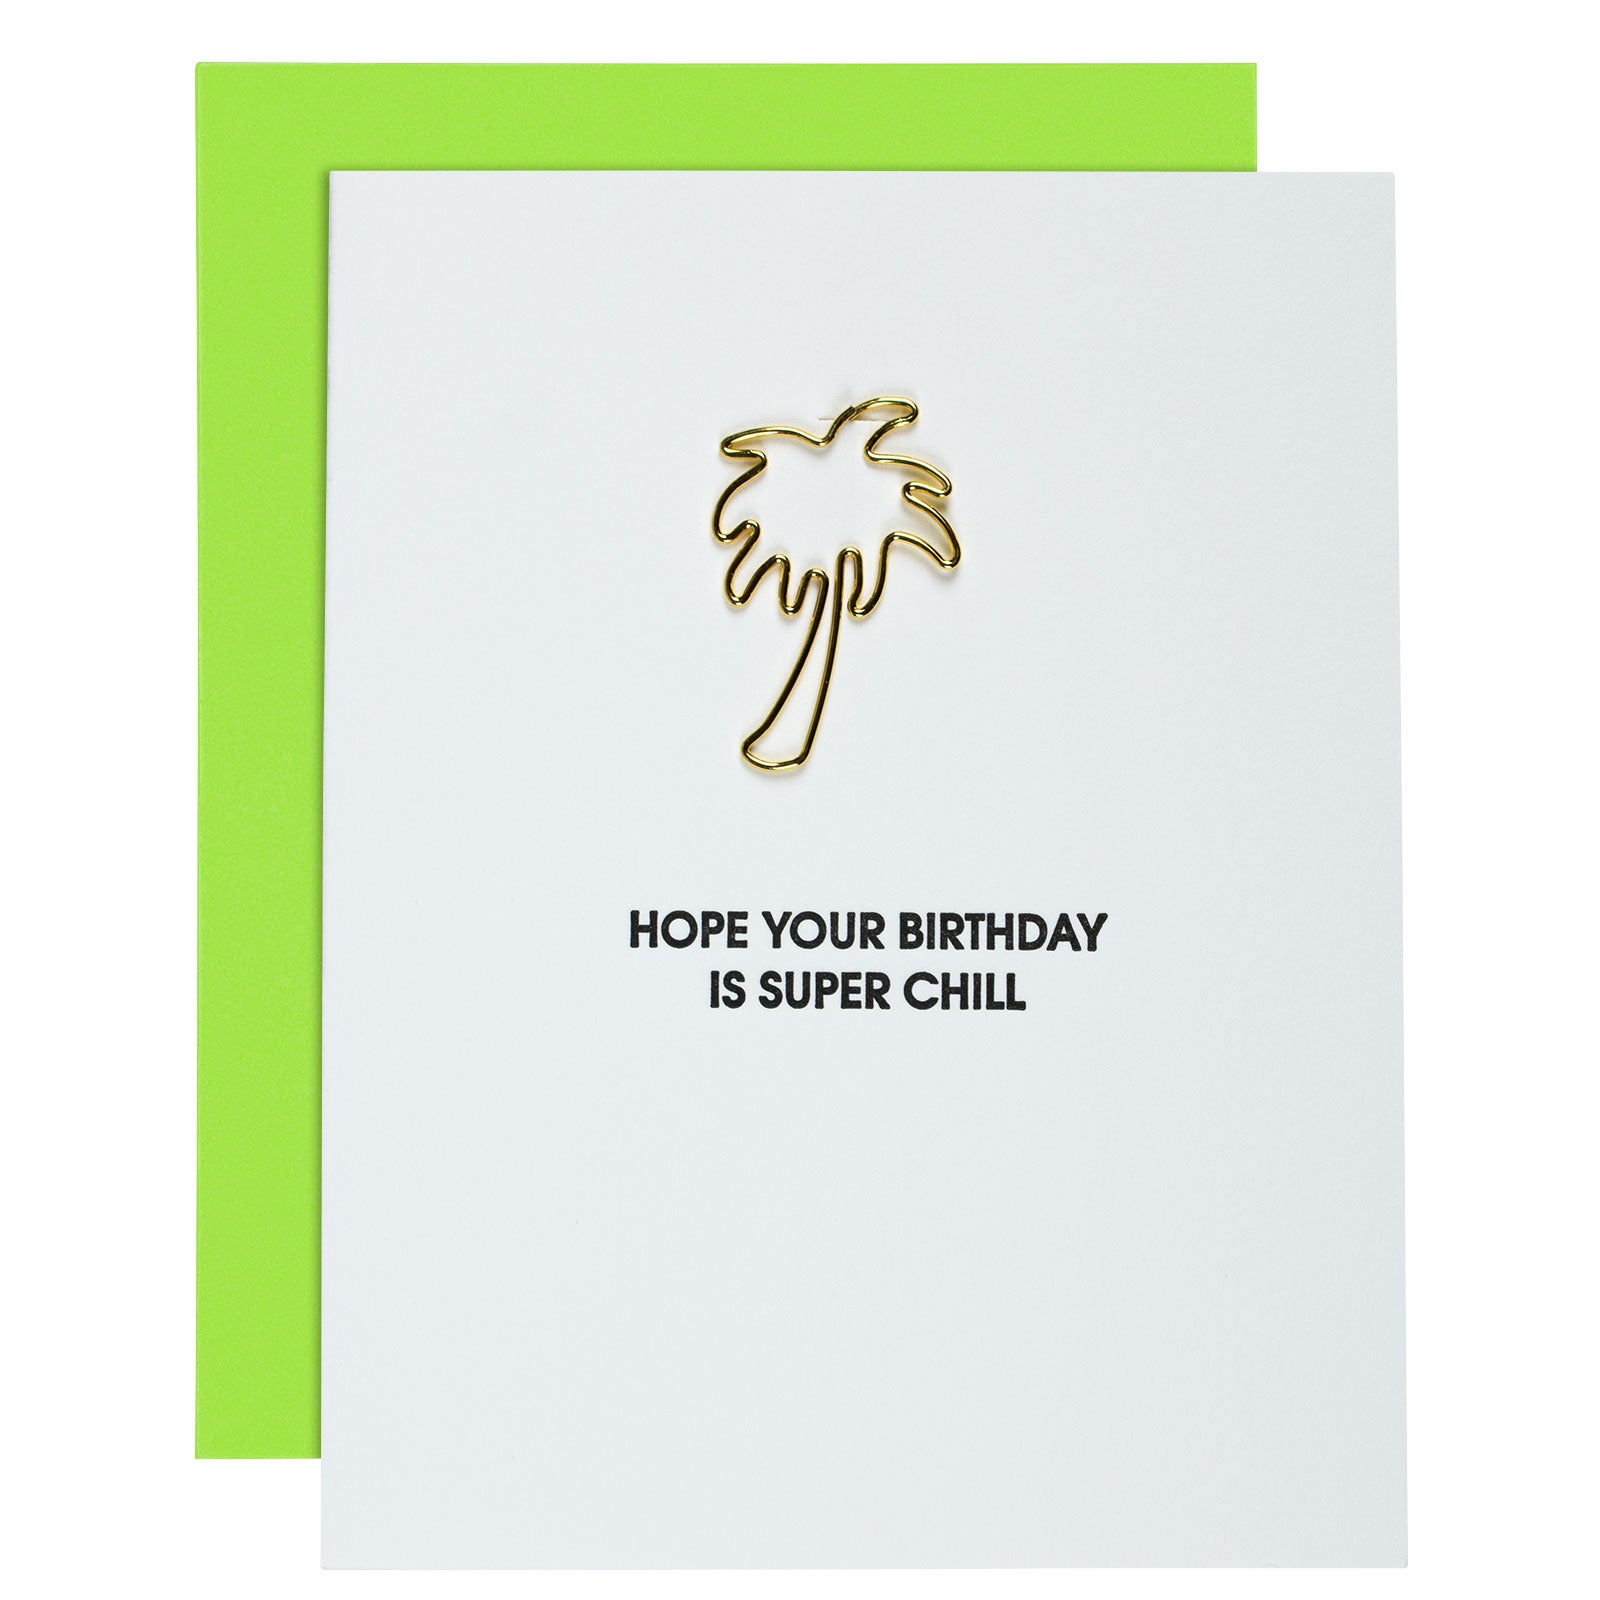 Hope Your Birthday Is Super Chill - Palm Tree Paper Clip Letterpress Card